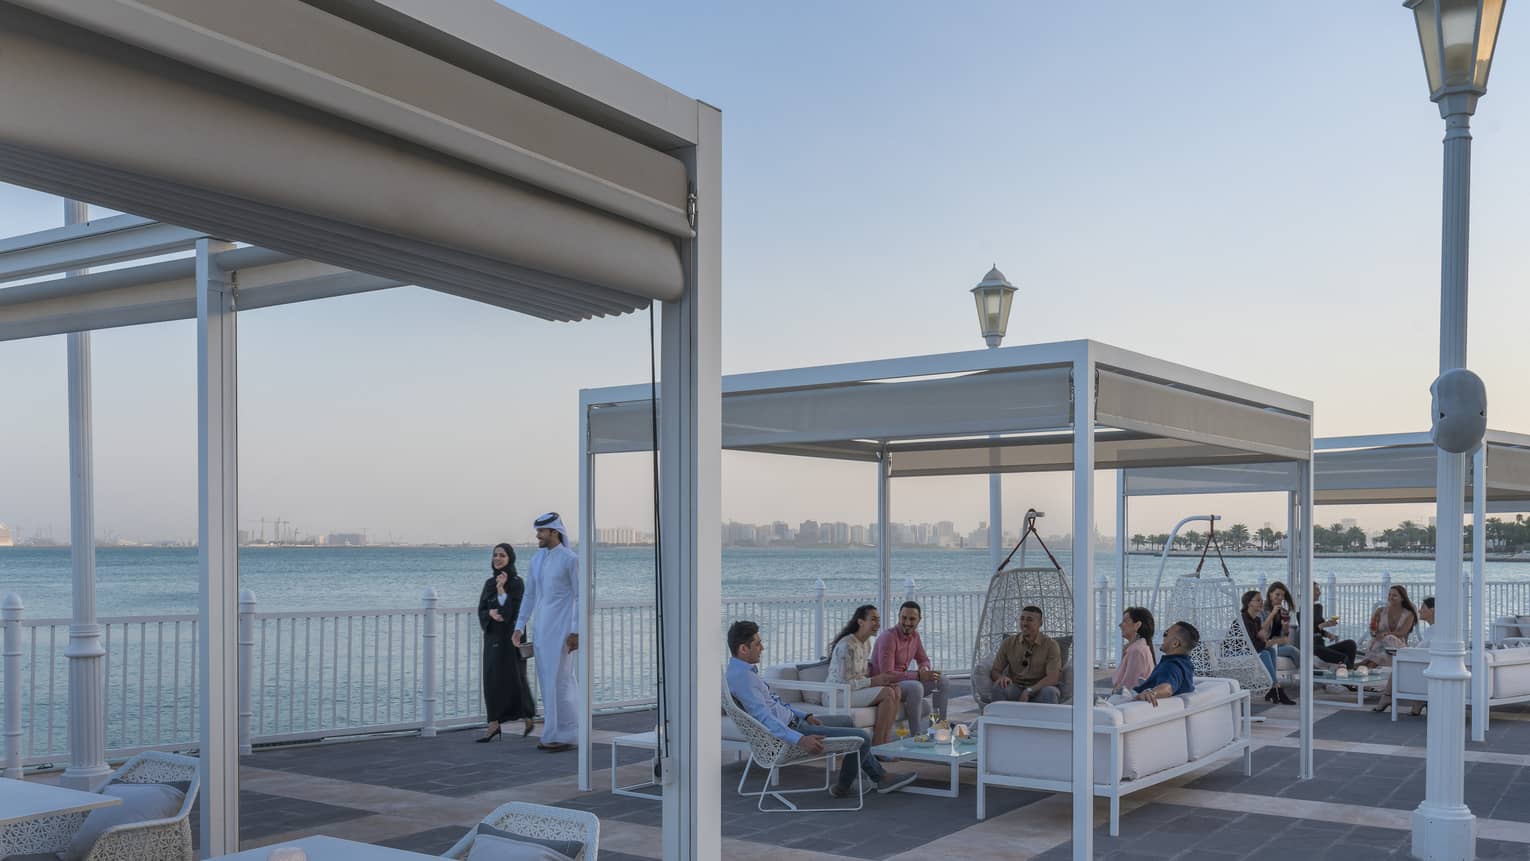 People mingle at outdoor lounge The Pier at Four Seasons Doha, overlooking the sea